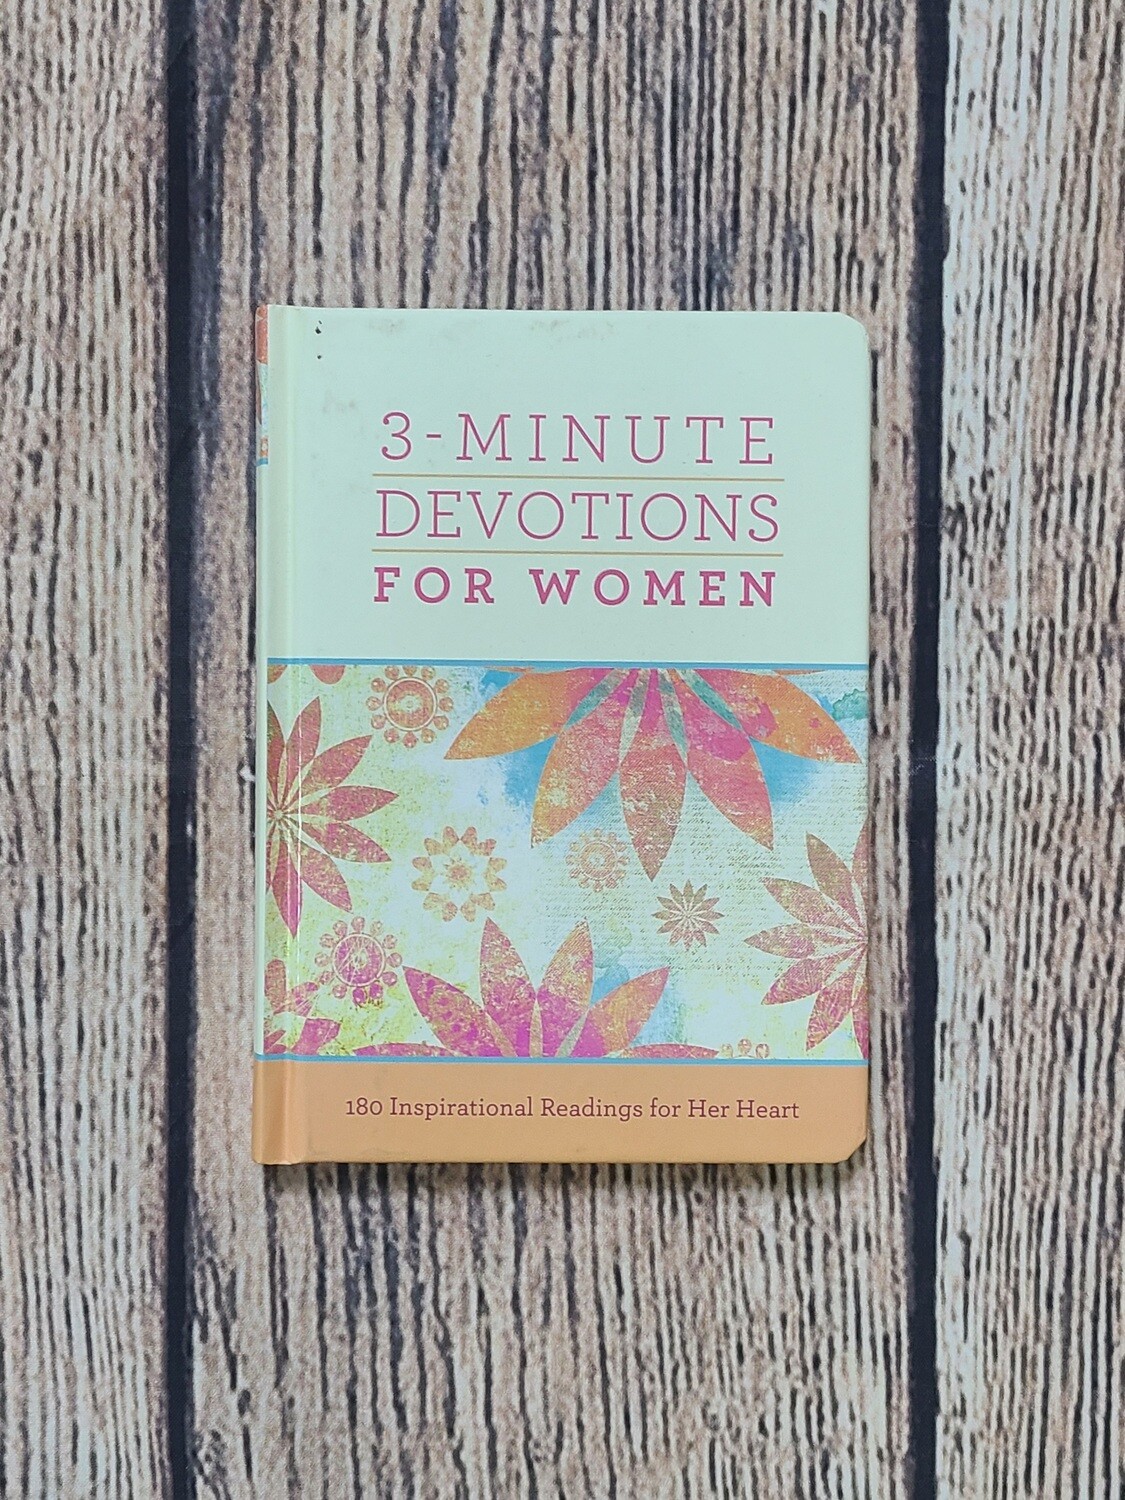 3-Minute Devotions for Women: 180 Inspirational Readings for Her Heart by Barbour Publishing - Hardback - New